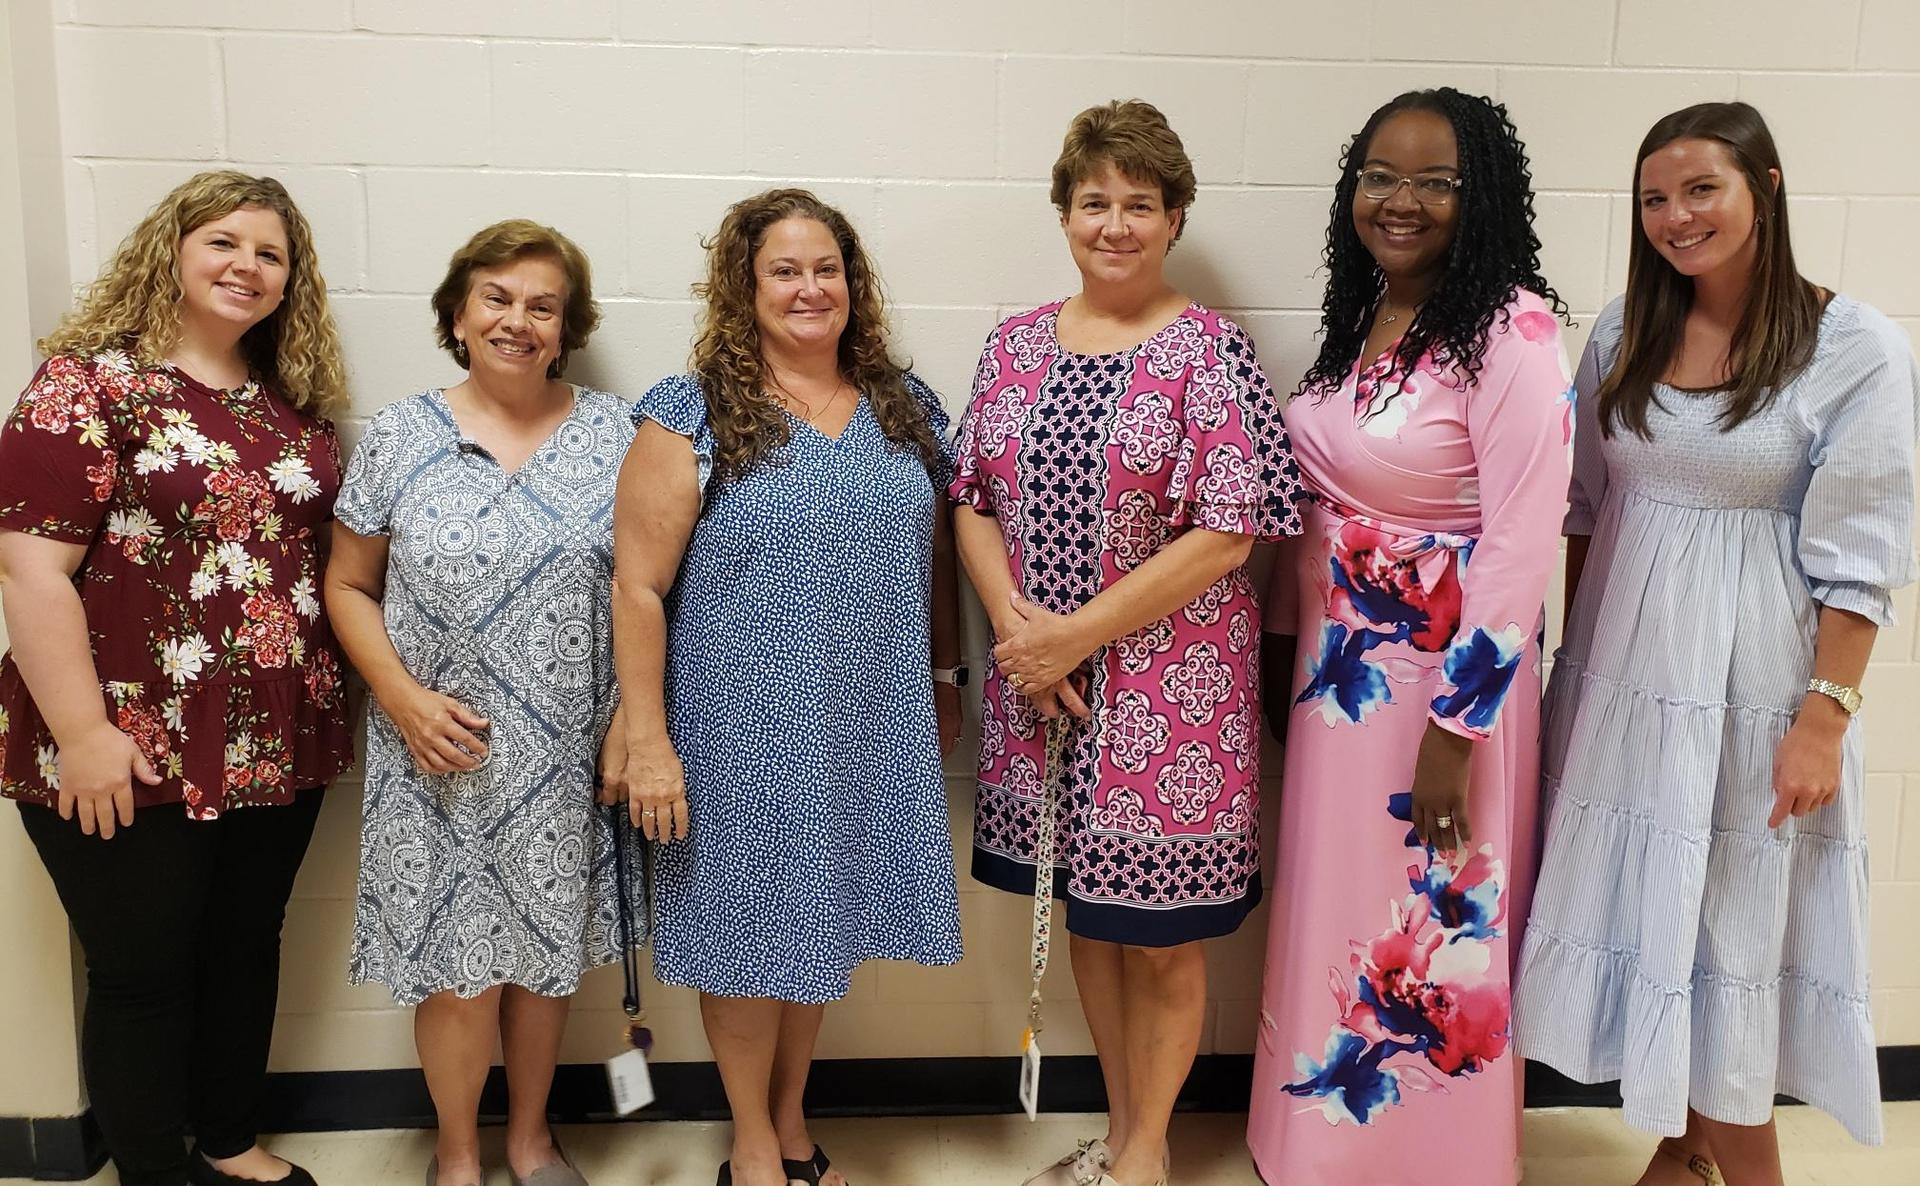 Ms. Hendricks, Ms. Chamblee, Ms. Lamm, Ms. Parrish, Ms. Bland, Ms. Reavis standing in a row in the hallway